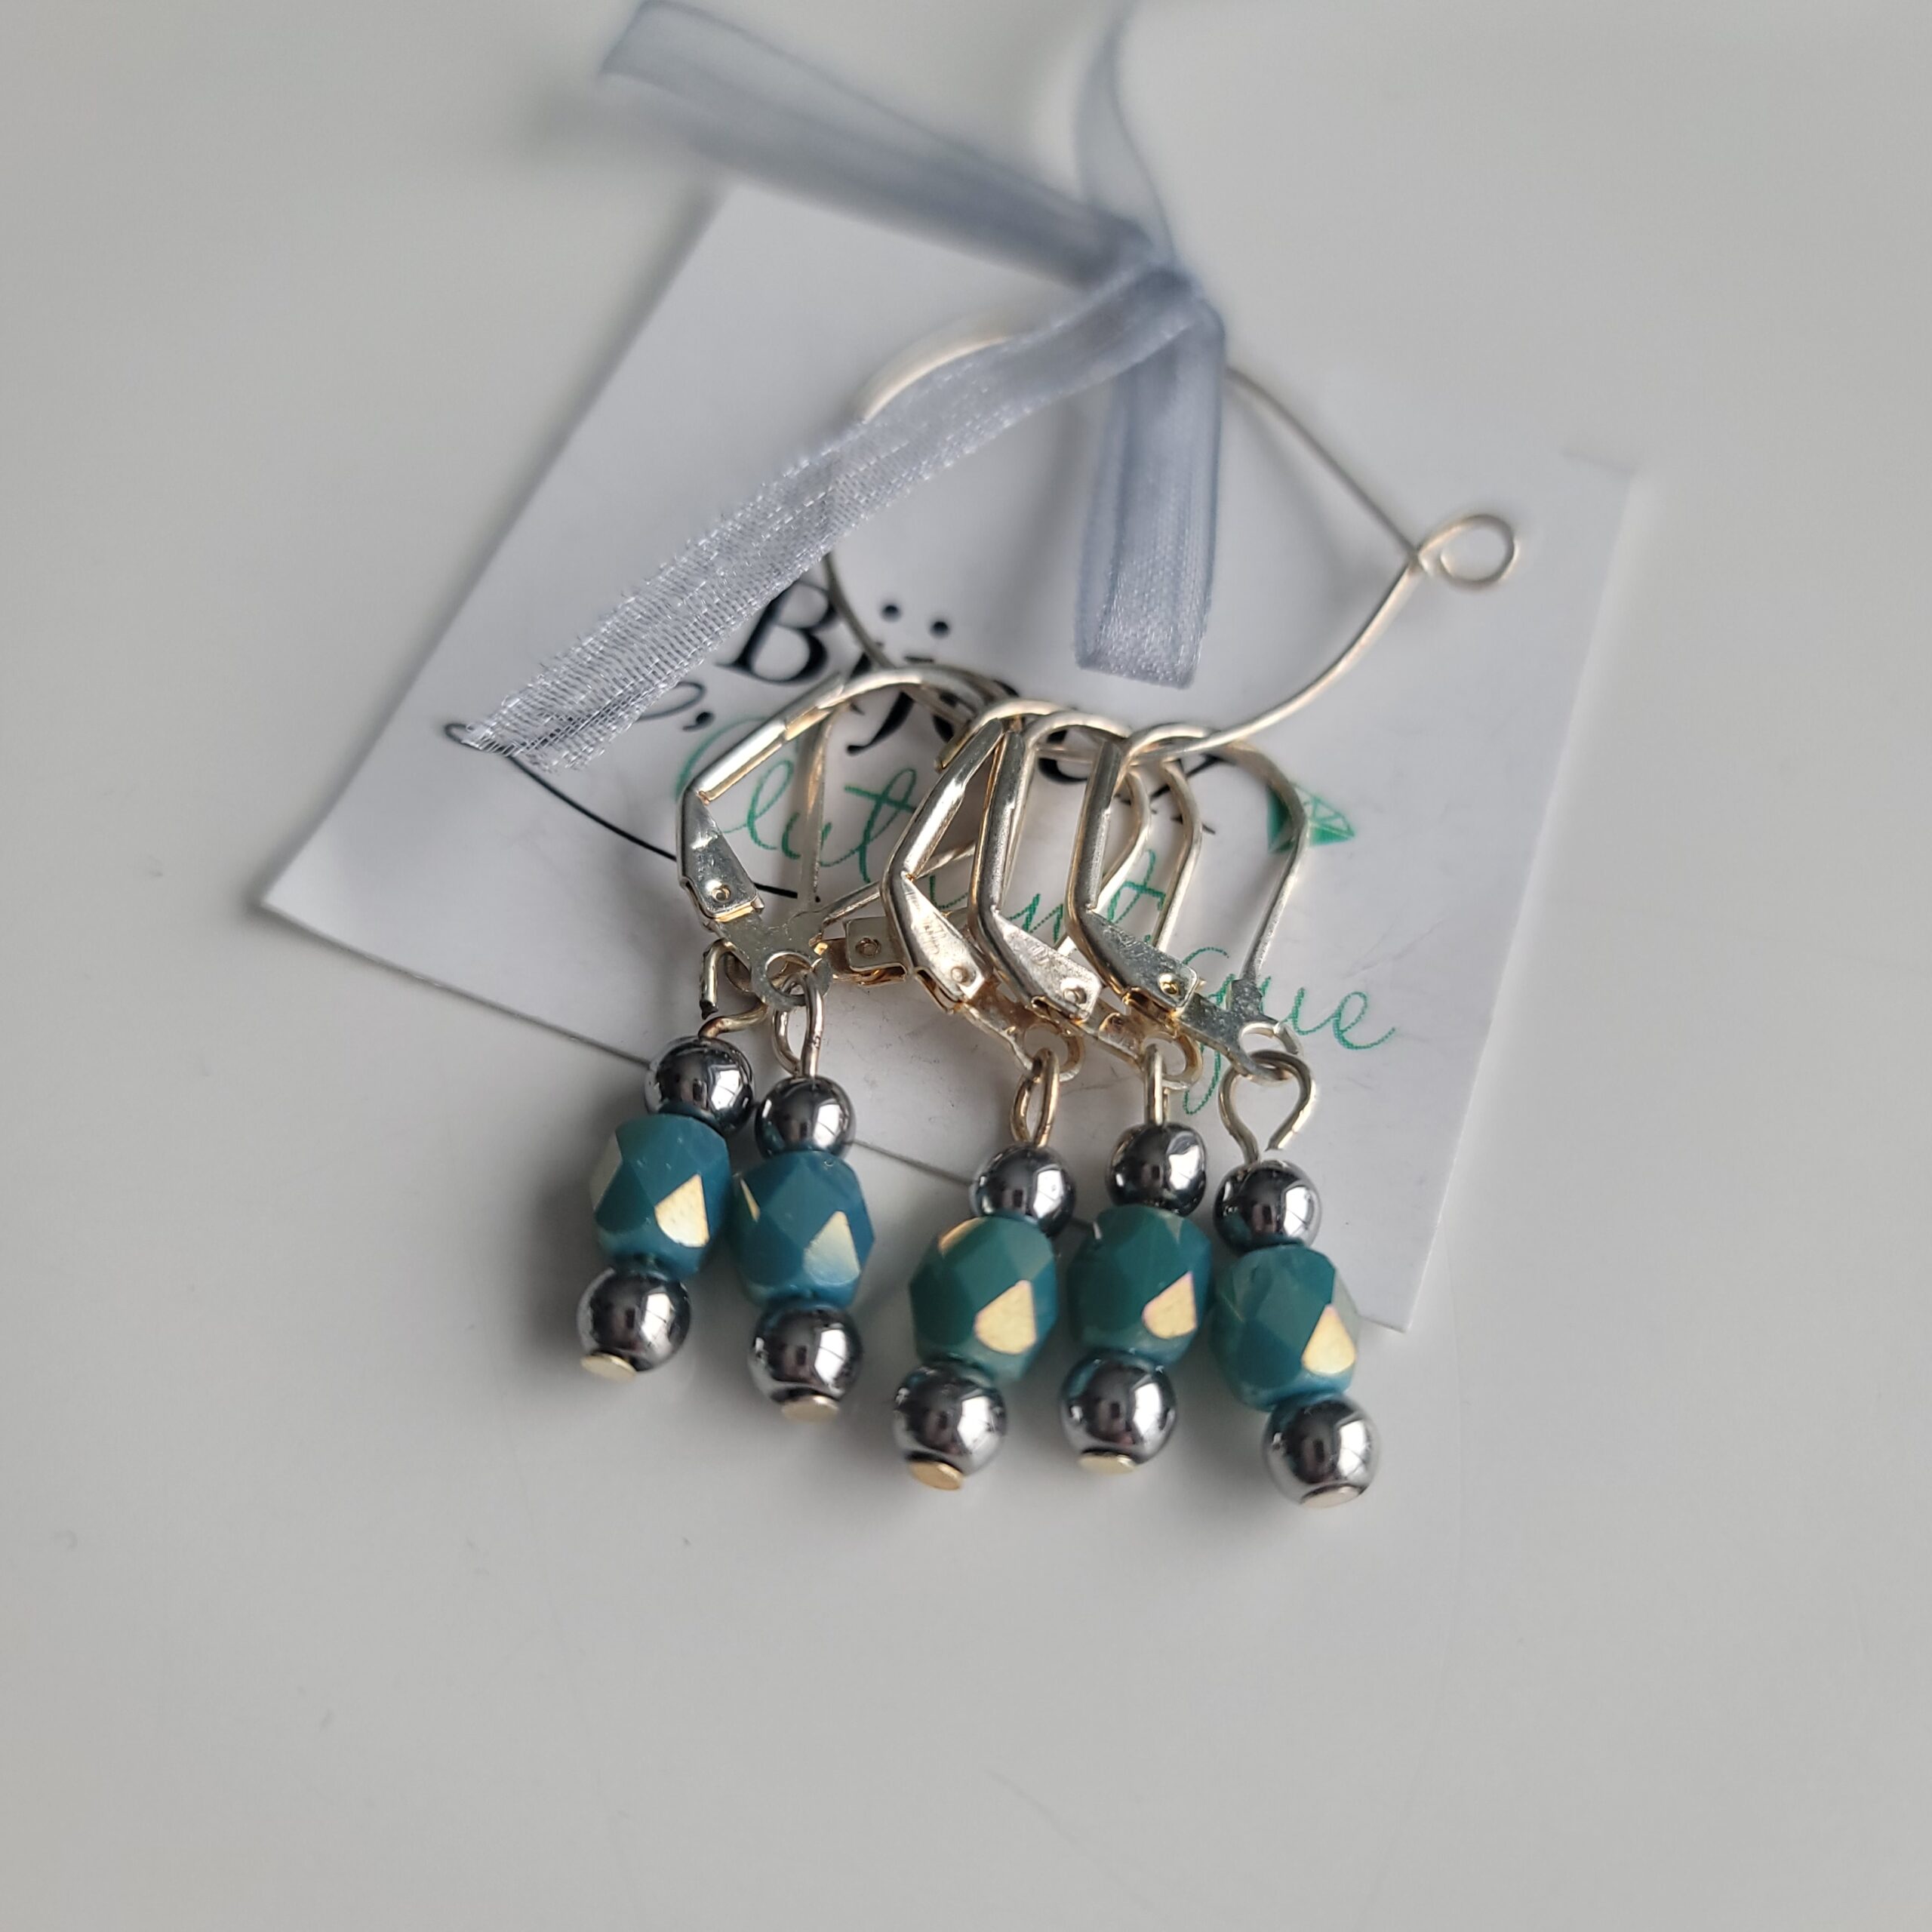 Stitch markers - turquoise beads - ACCROchet